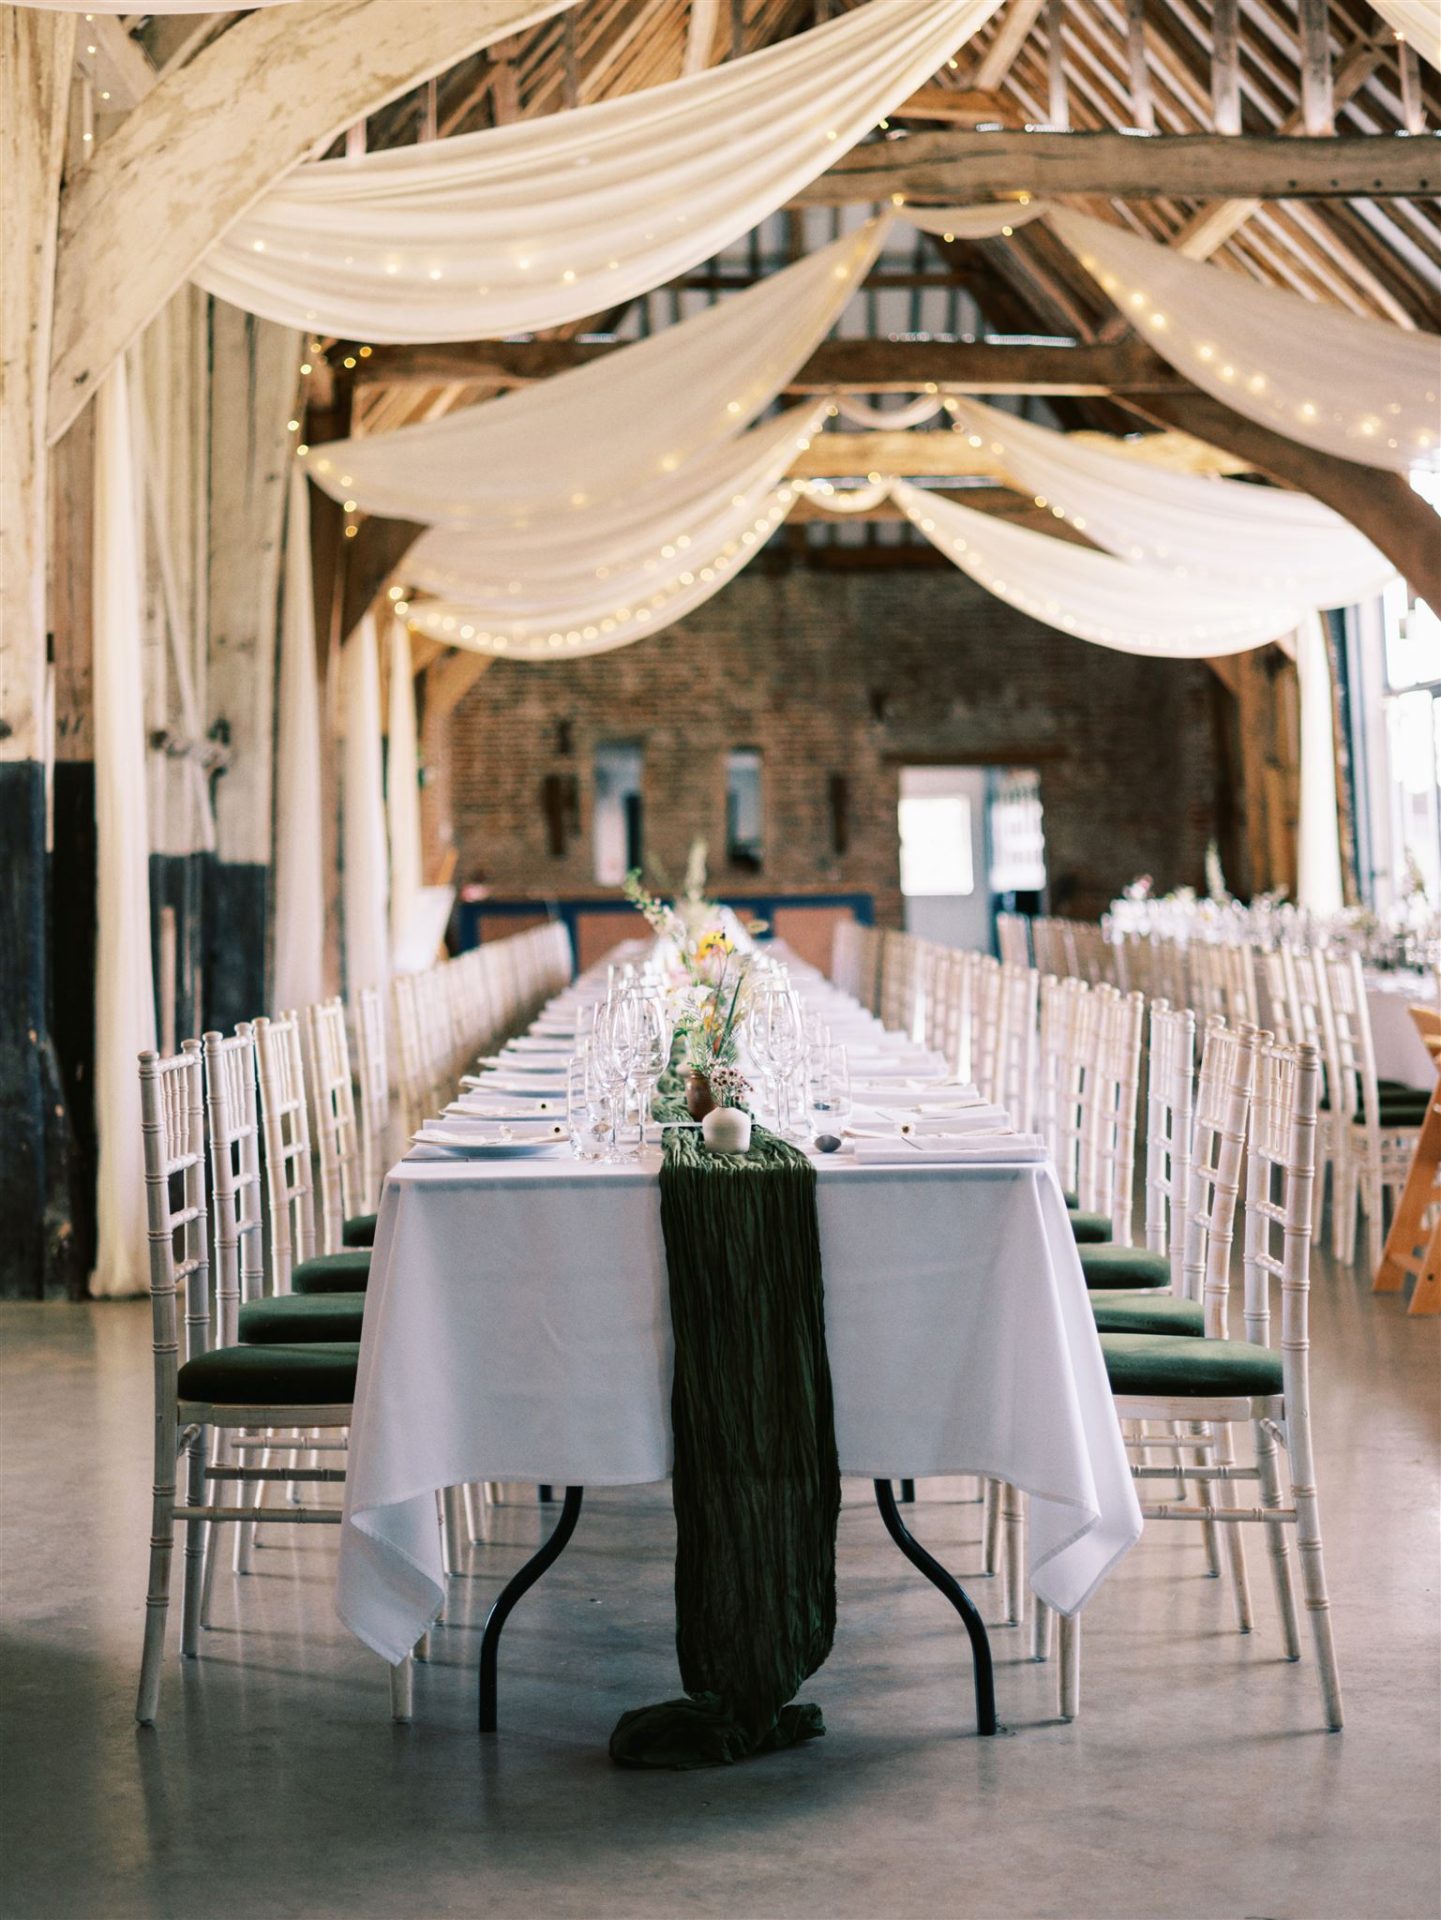 rustic barn venue with ceiling drapery and banqueting table with white linen, forest green runner and small yellow and pink bud vases